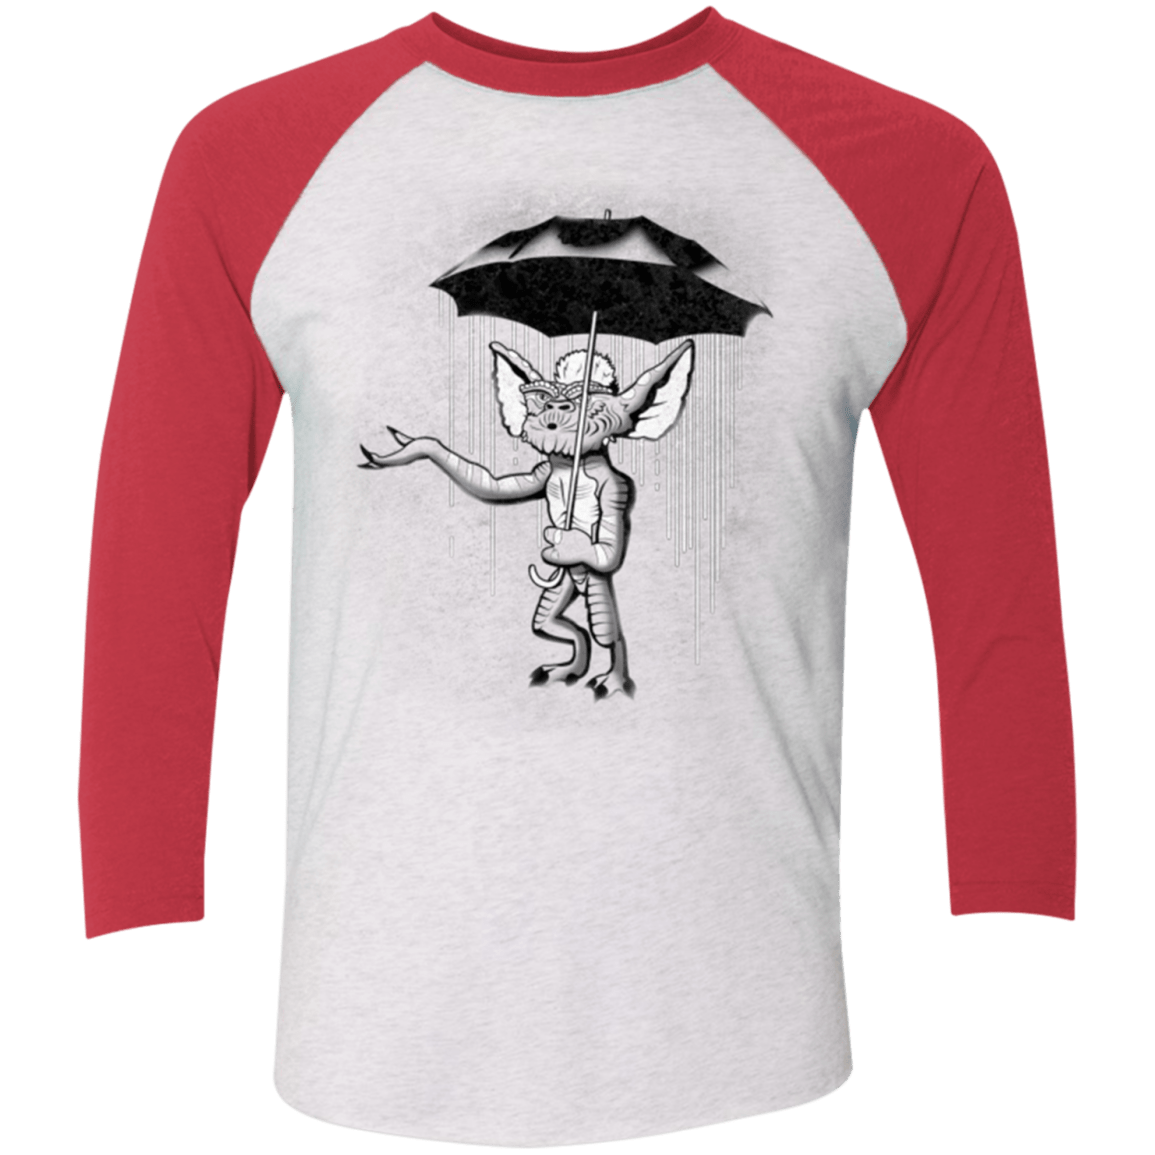 T-Shirts Heather White/Vintage Red / X-Small Umbrella Banksy Men's Triblend 3/4 Sleeve